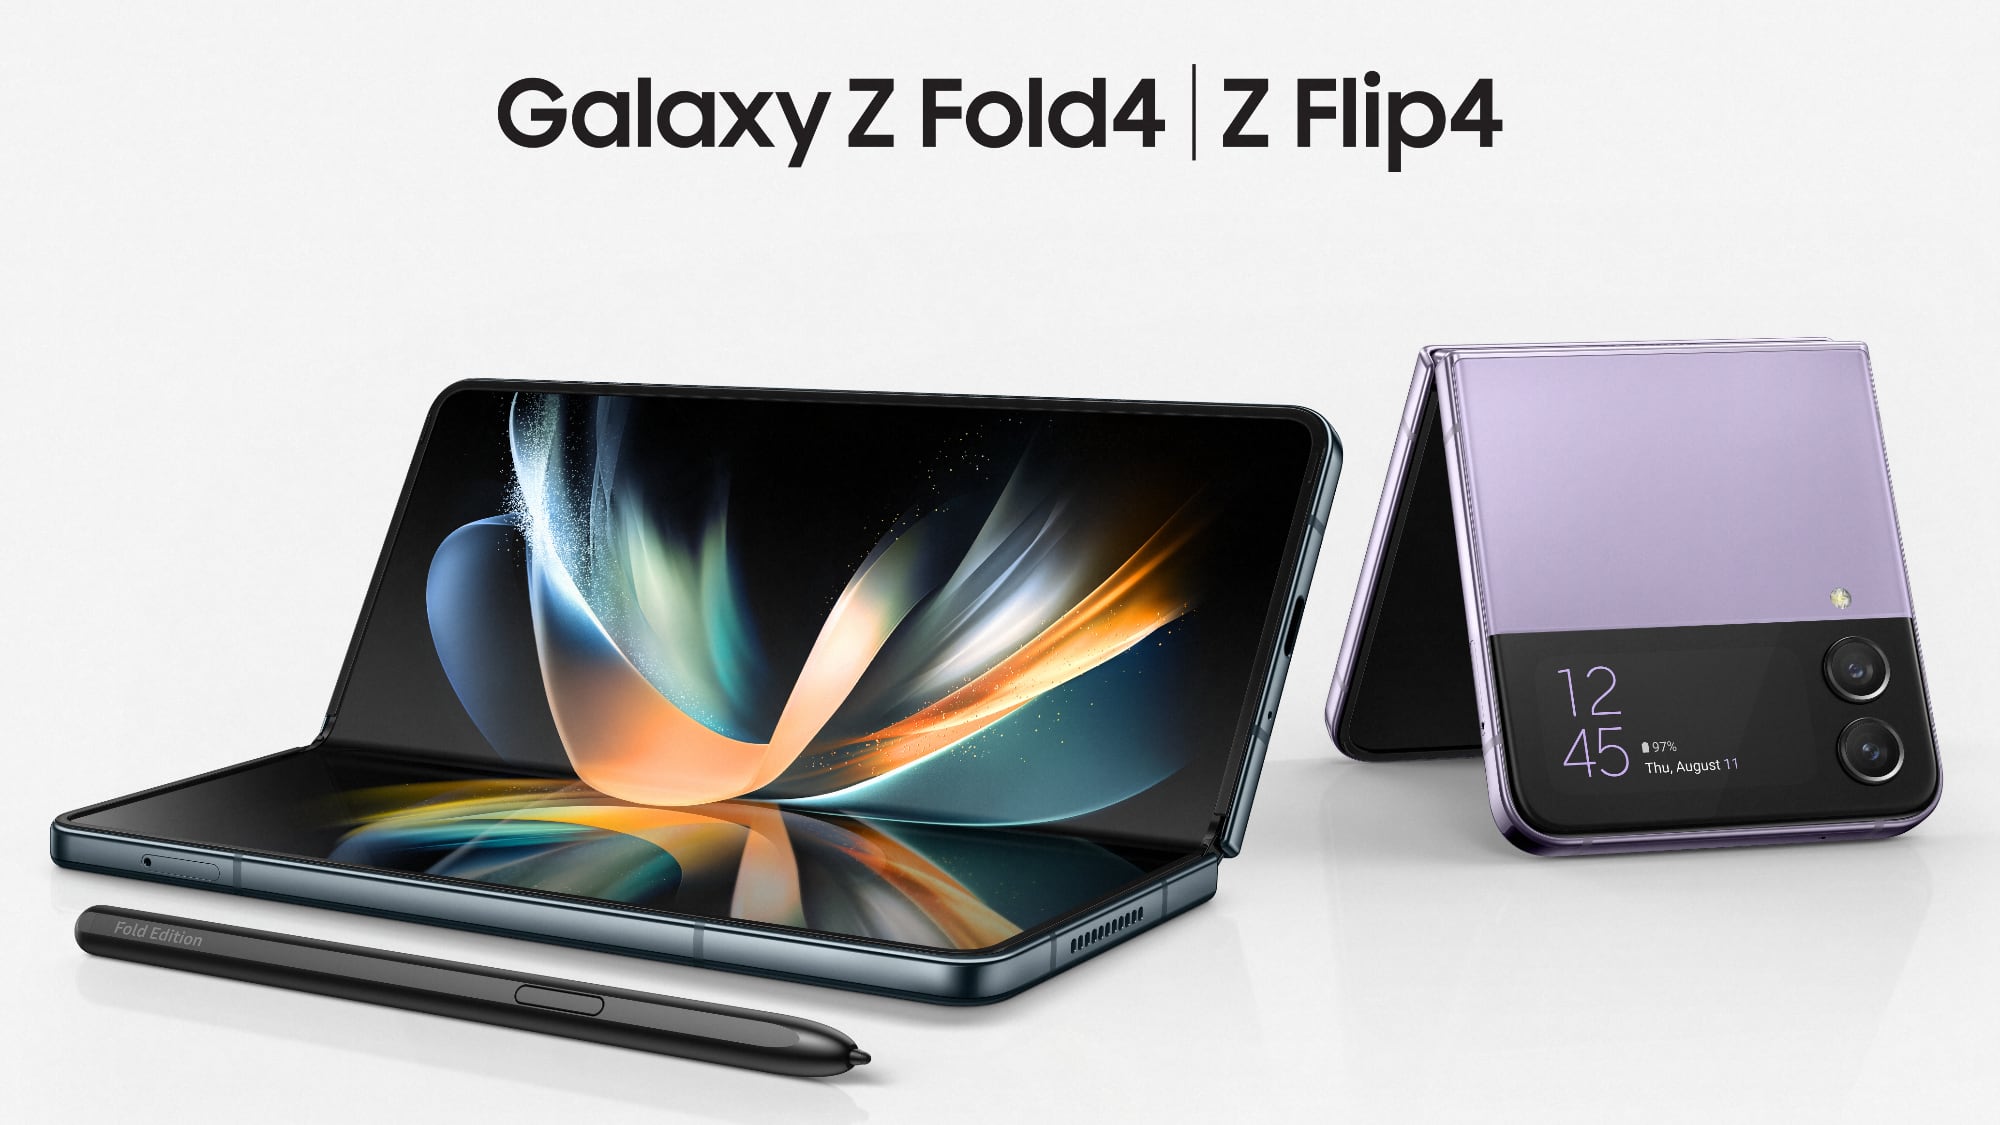 Samsung Launches New Galaxy Z Flip 4 and Galaxy Z Fold 4 Smartphones